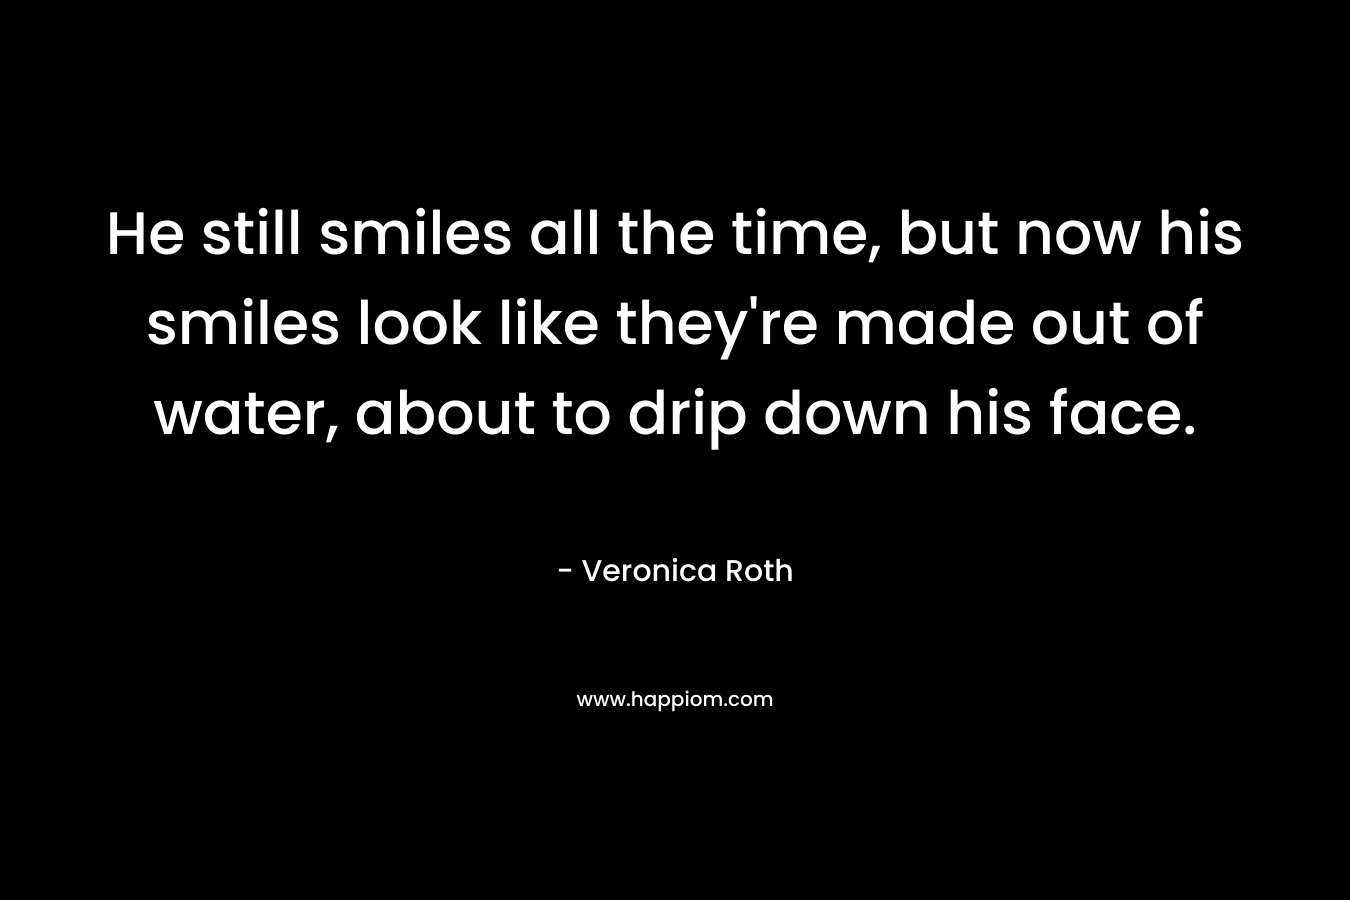 He still smiles all the time, but now his smiles look like they're made out of water, about to drip down his face.